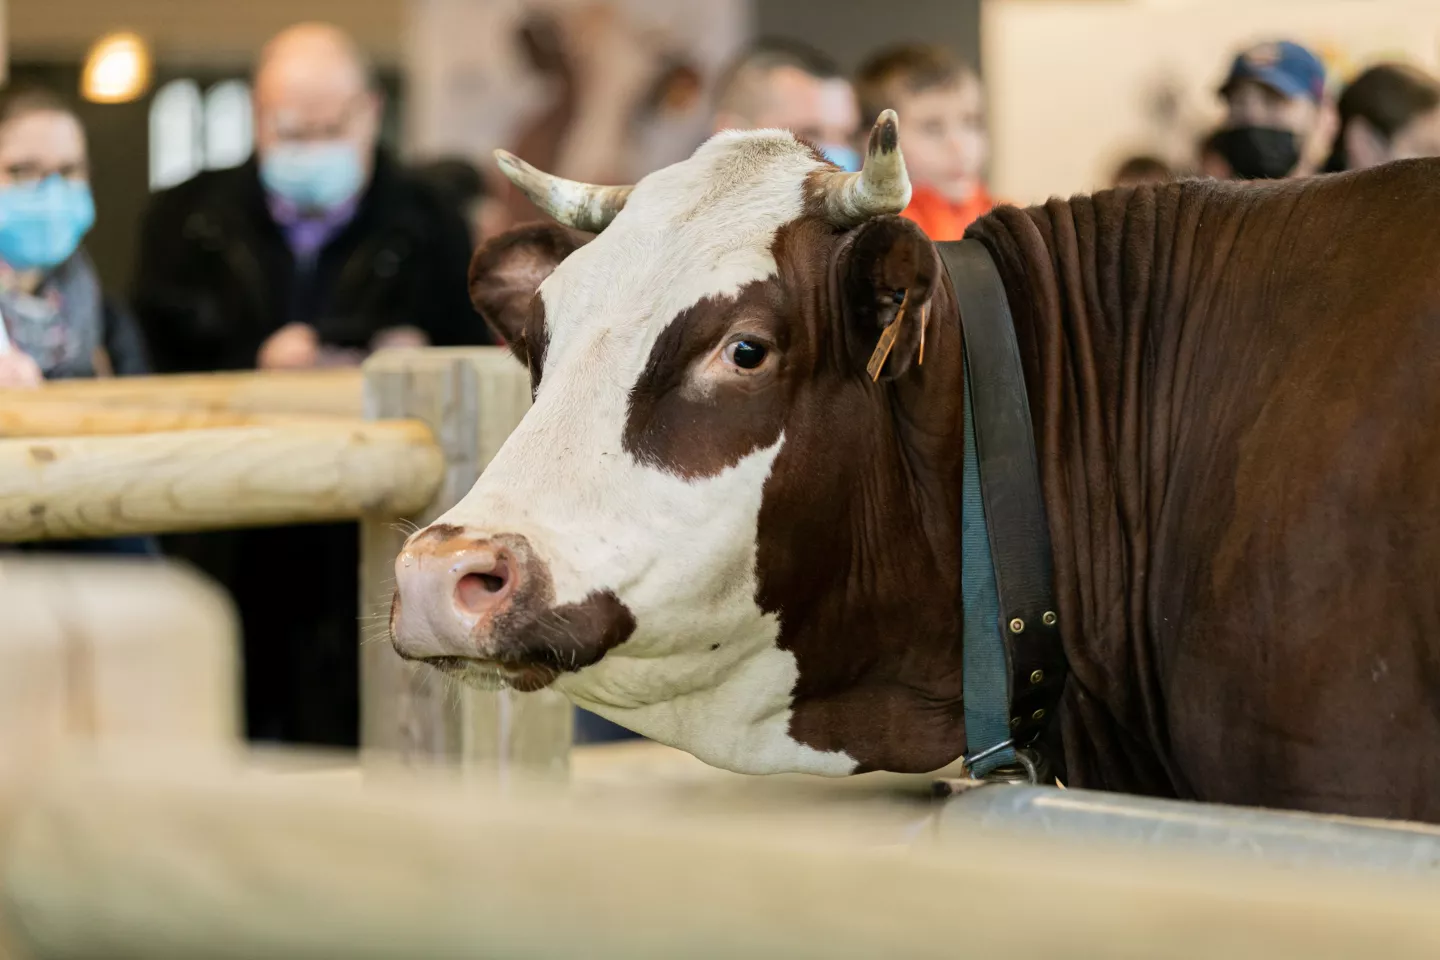 Discover the world's largest Food Fair: The Salon de l'Agriculture Experience